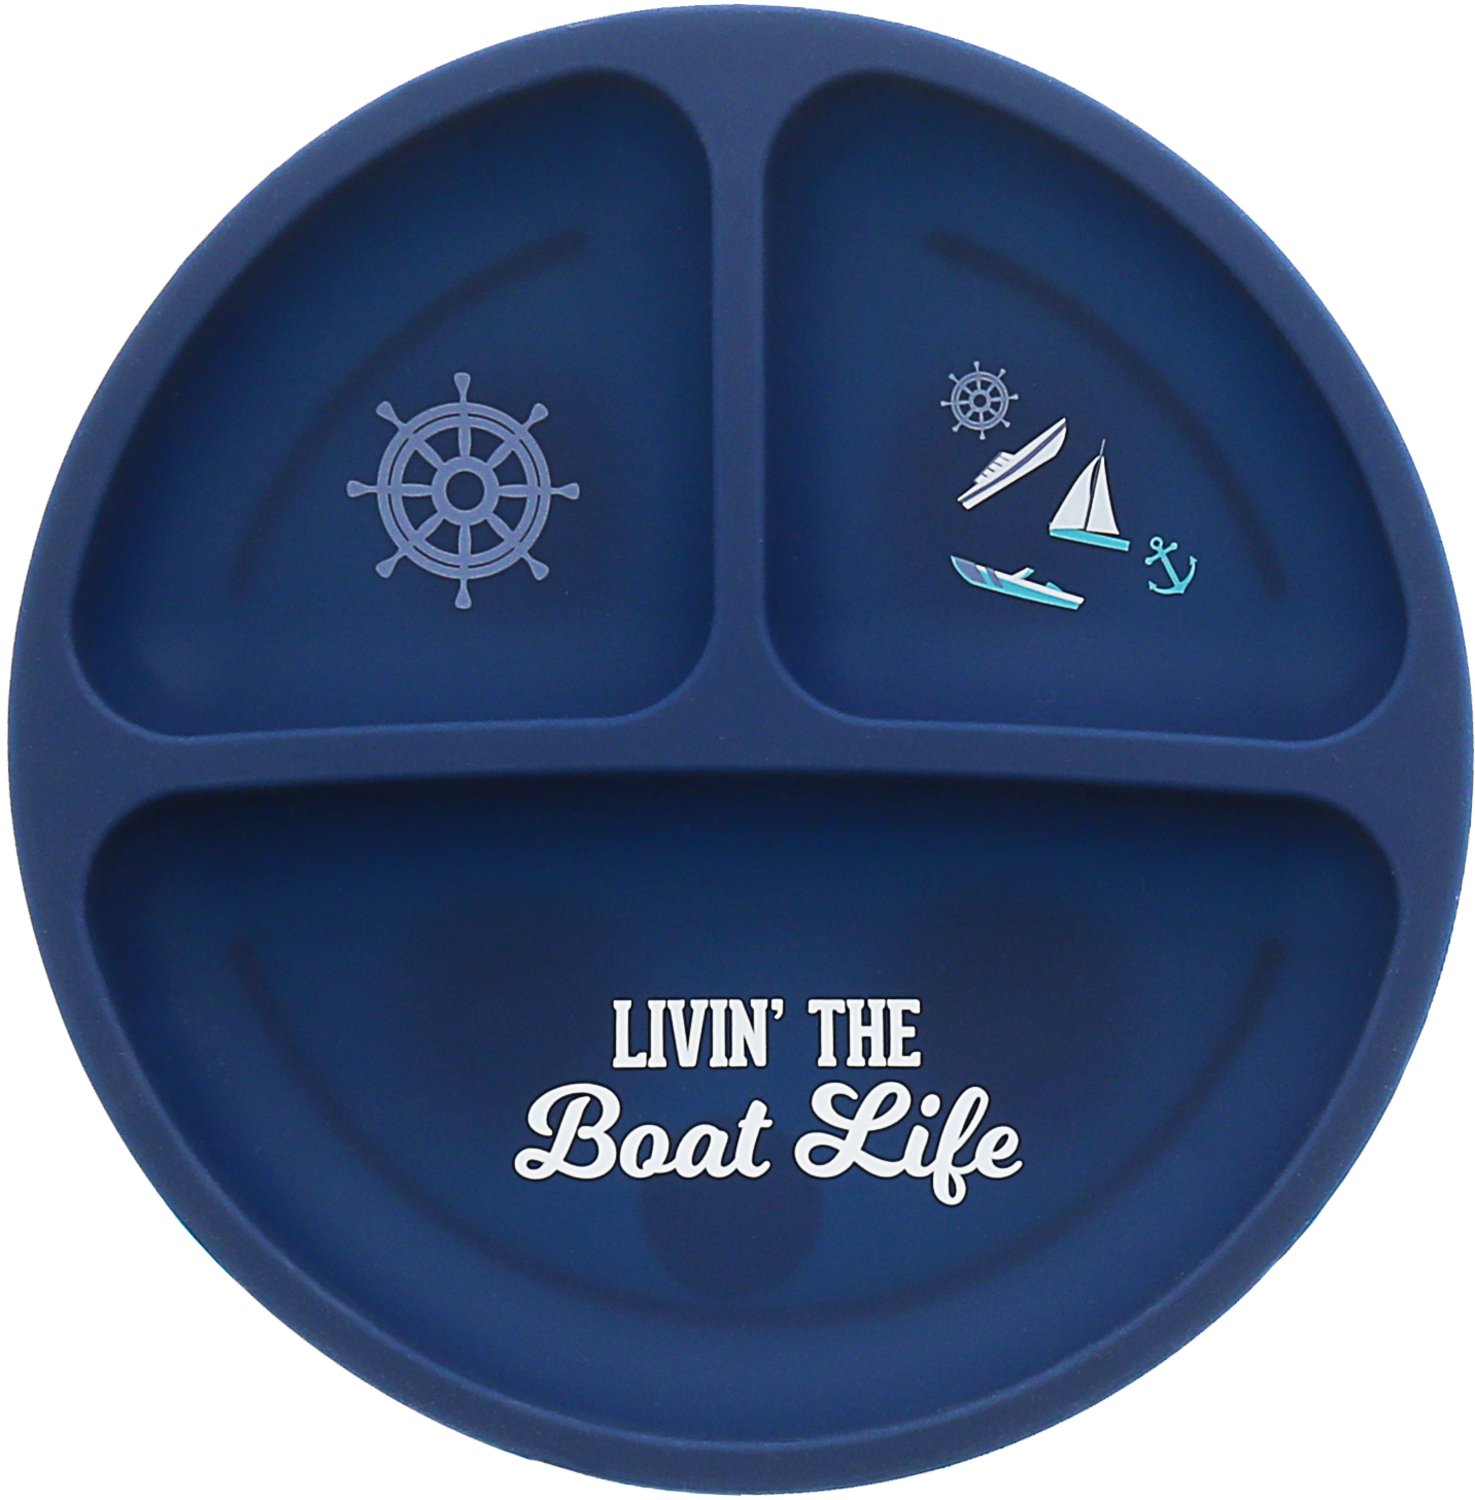 Boat Life by We Baby - Boat Life - 7.75" Divided Silicone Suction Plate